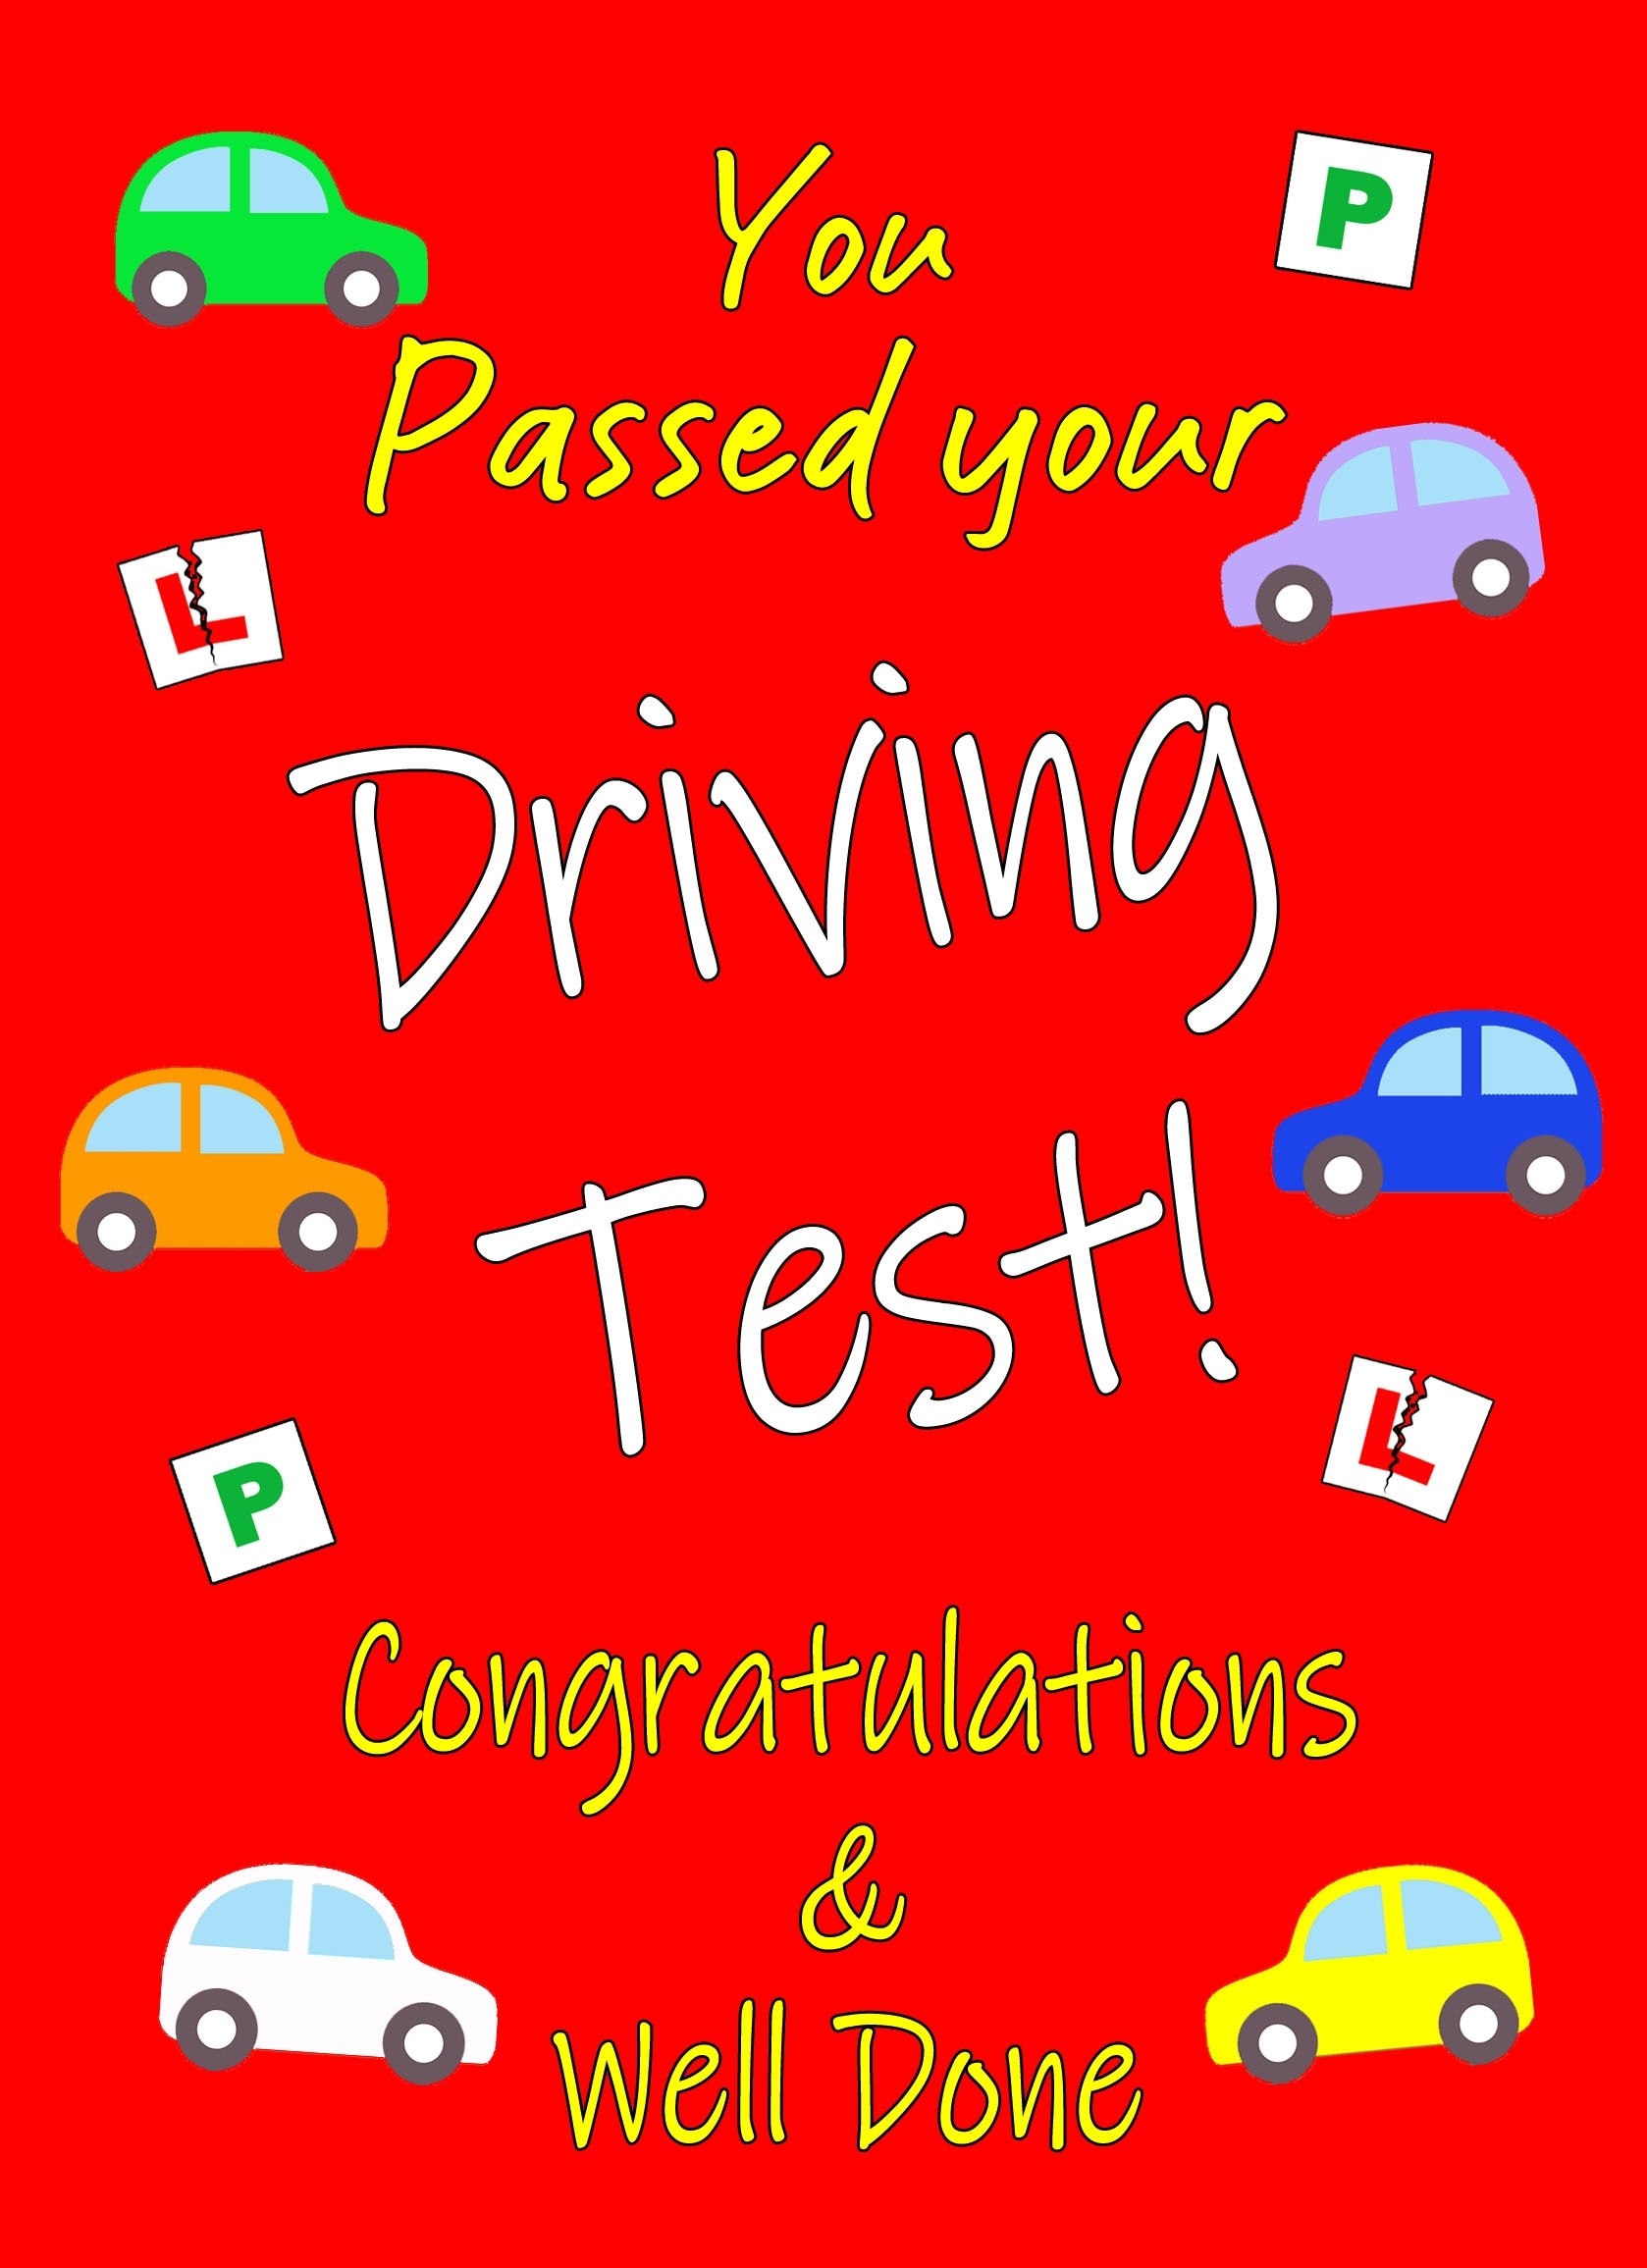 Passed Your Driving Test Card (Congratulations, Red)